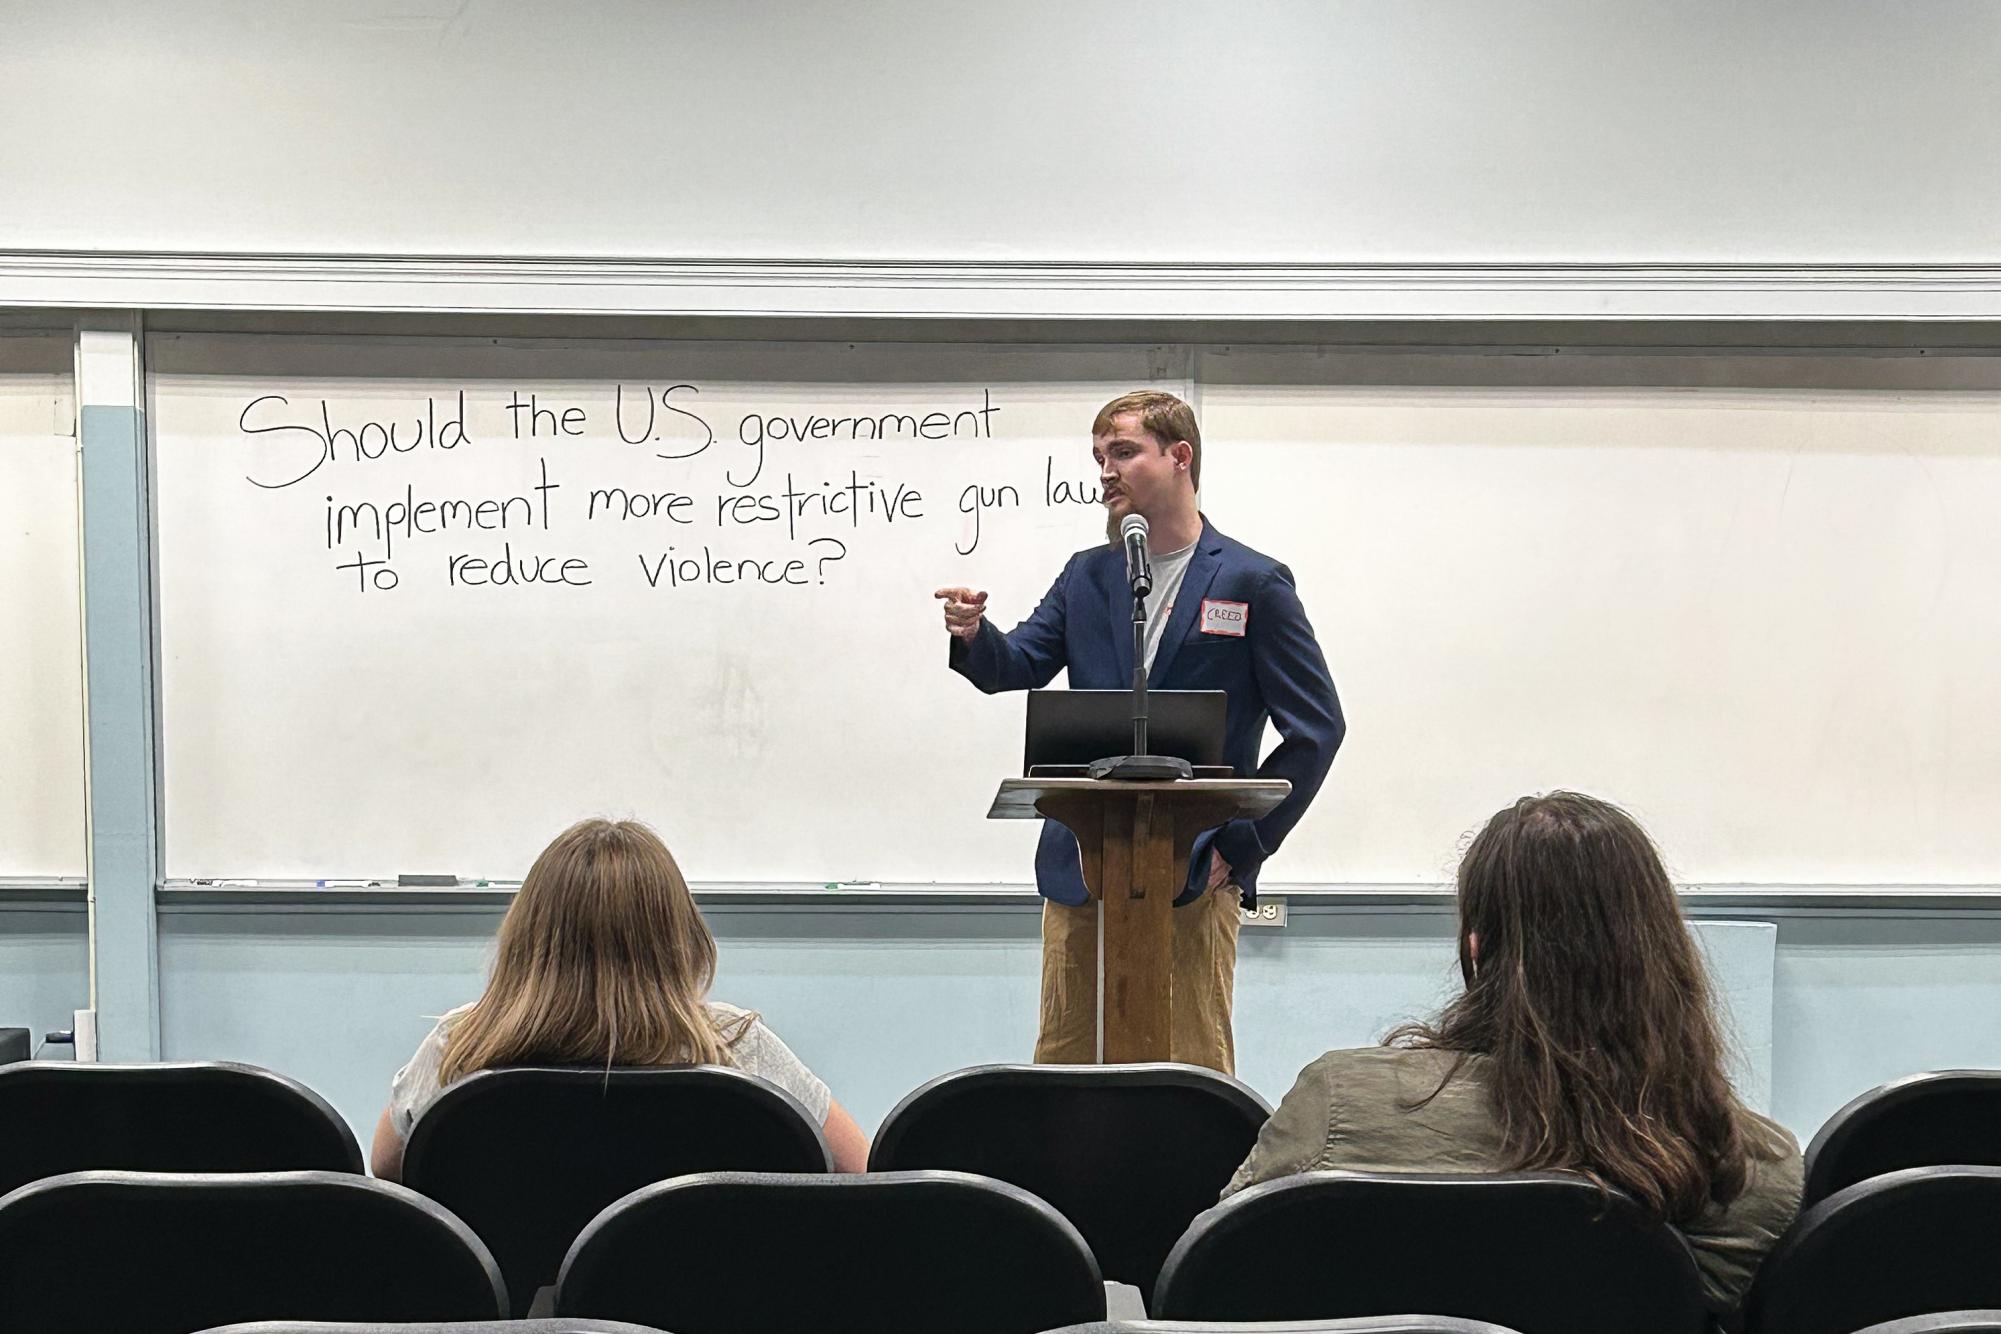 One student expresses his stance on gun control, after which other students have the chance to ask questions or make a rebuttal. The debate was moderated by Braver Angels, a non profit crated with the mission to depolarize America.